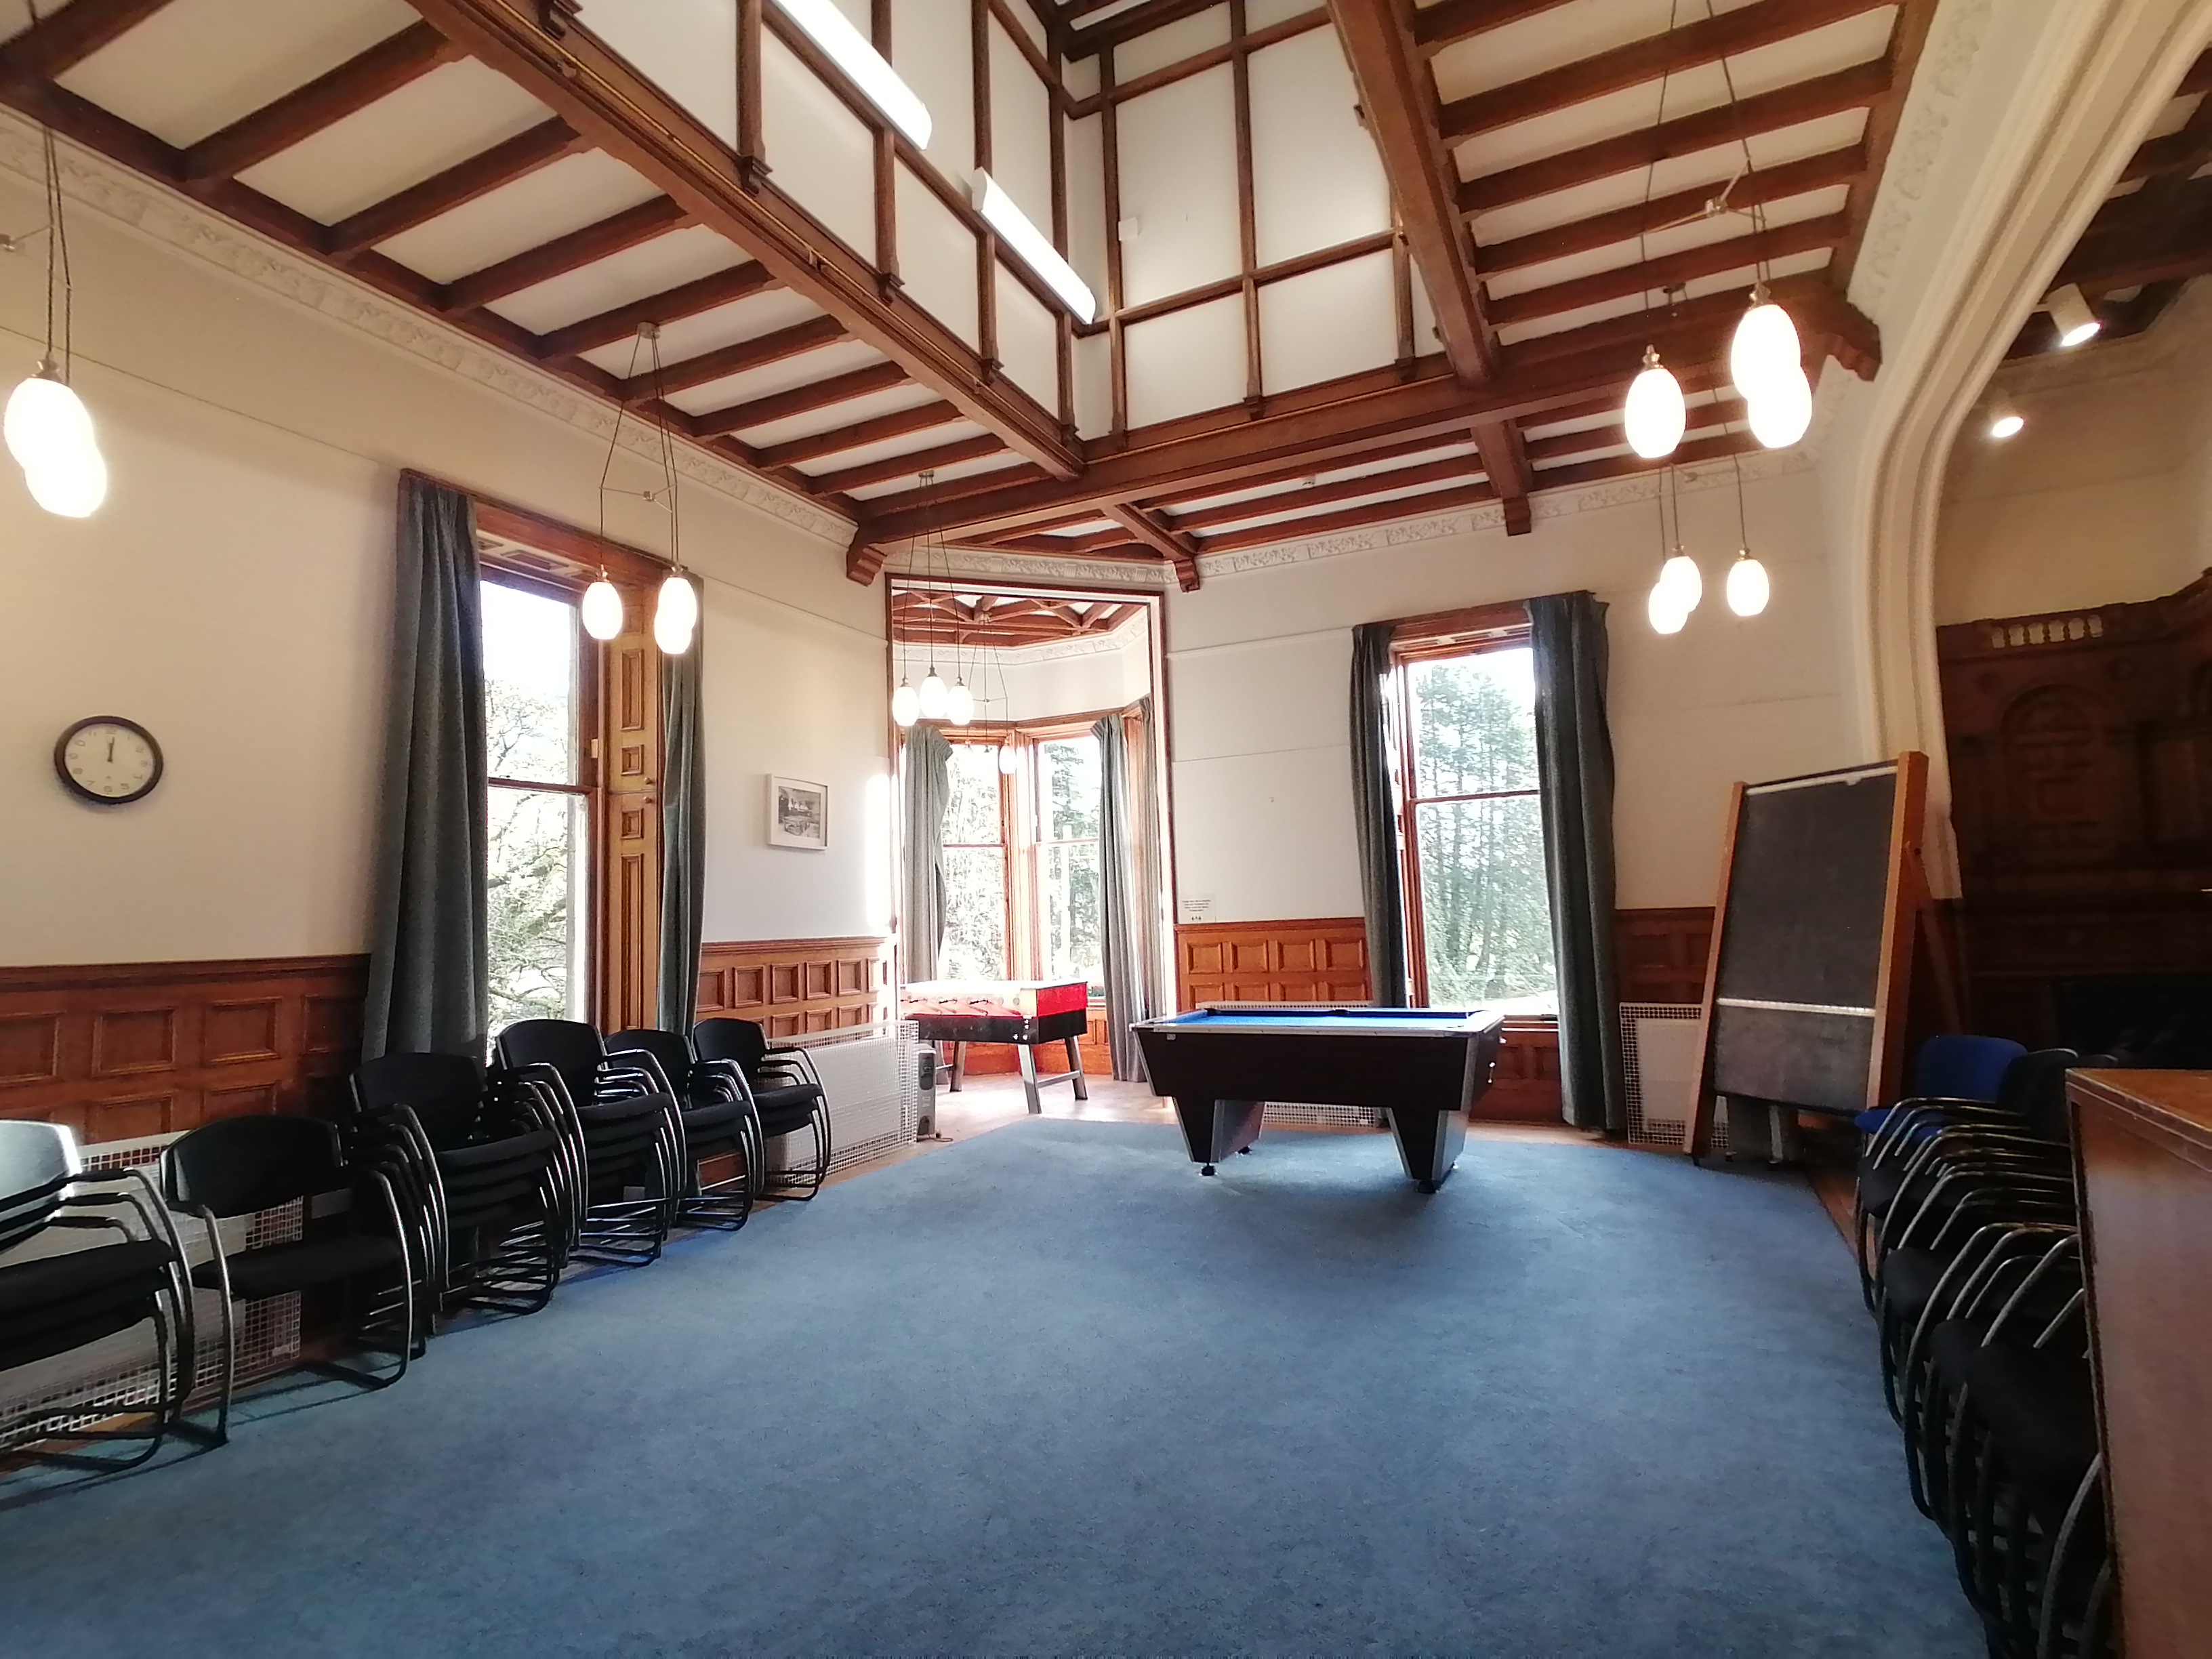 LECTURE ROOM